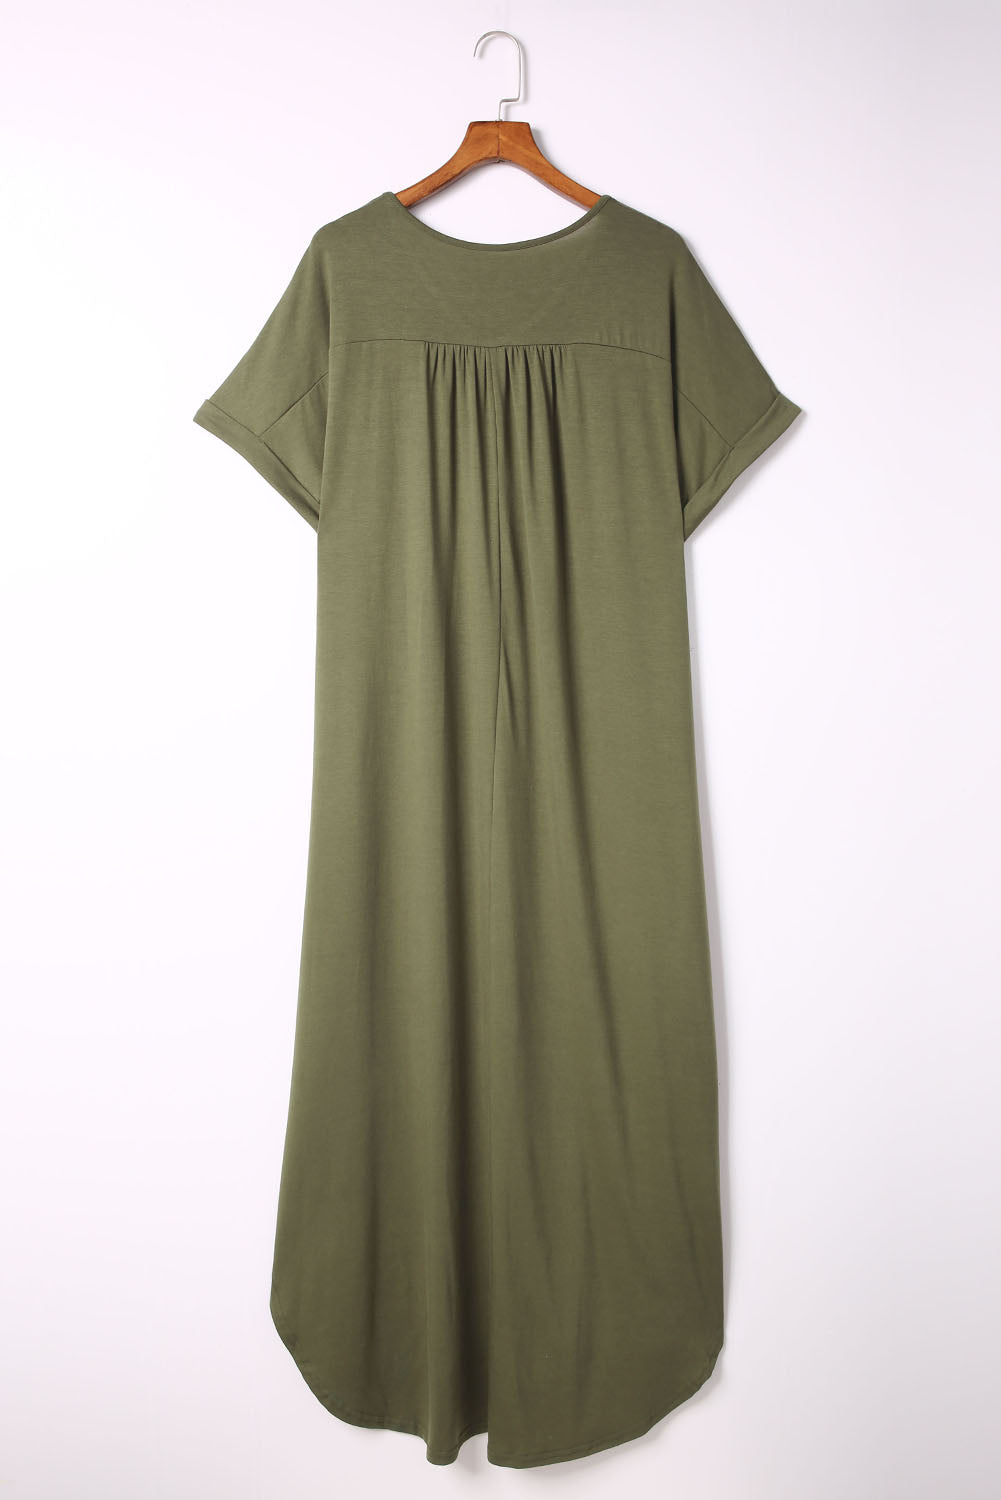 Green Plus Size V Neck Rolled Cuffs Maxi Dress - MeraKy Vibes